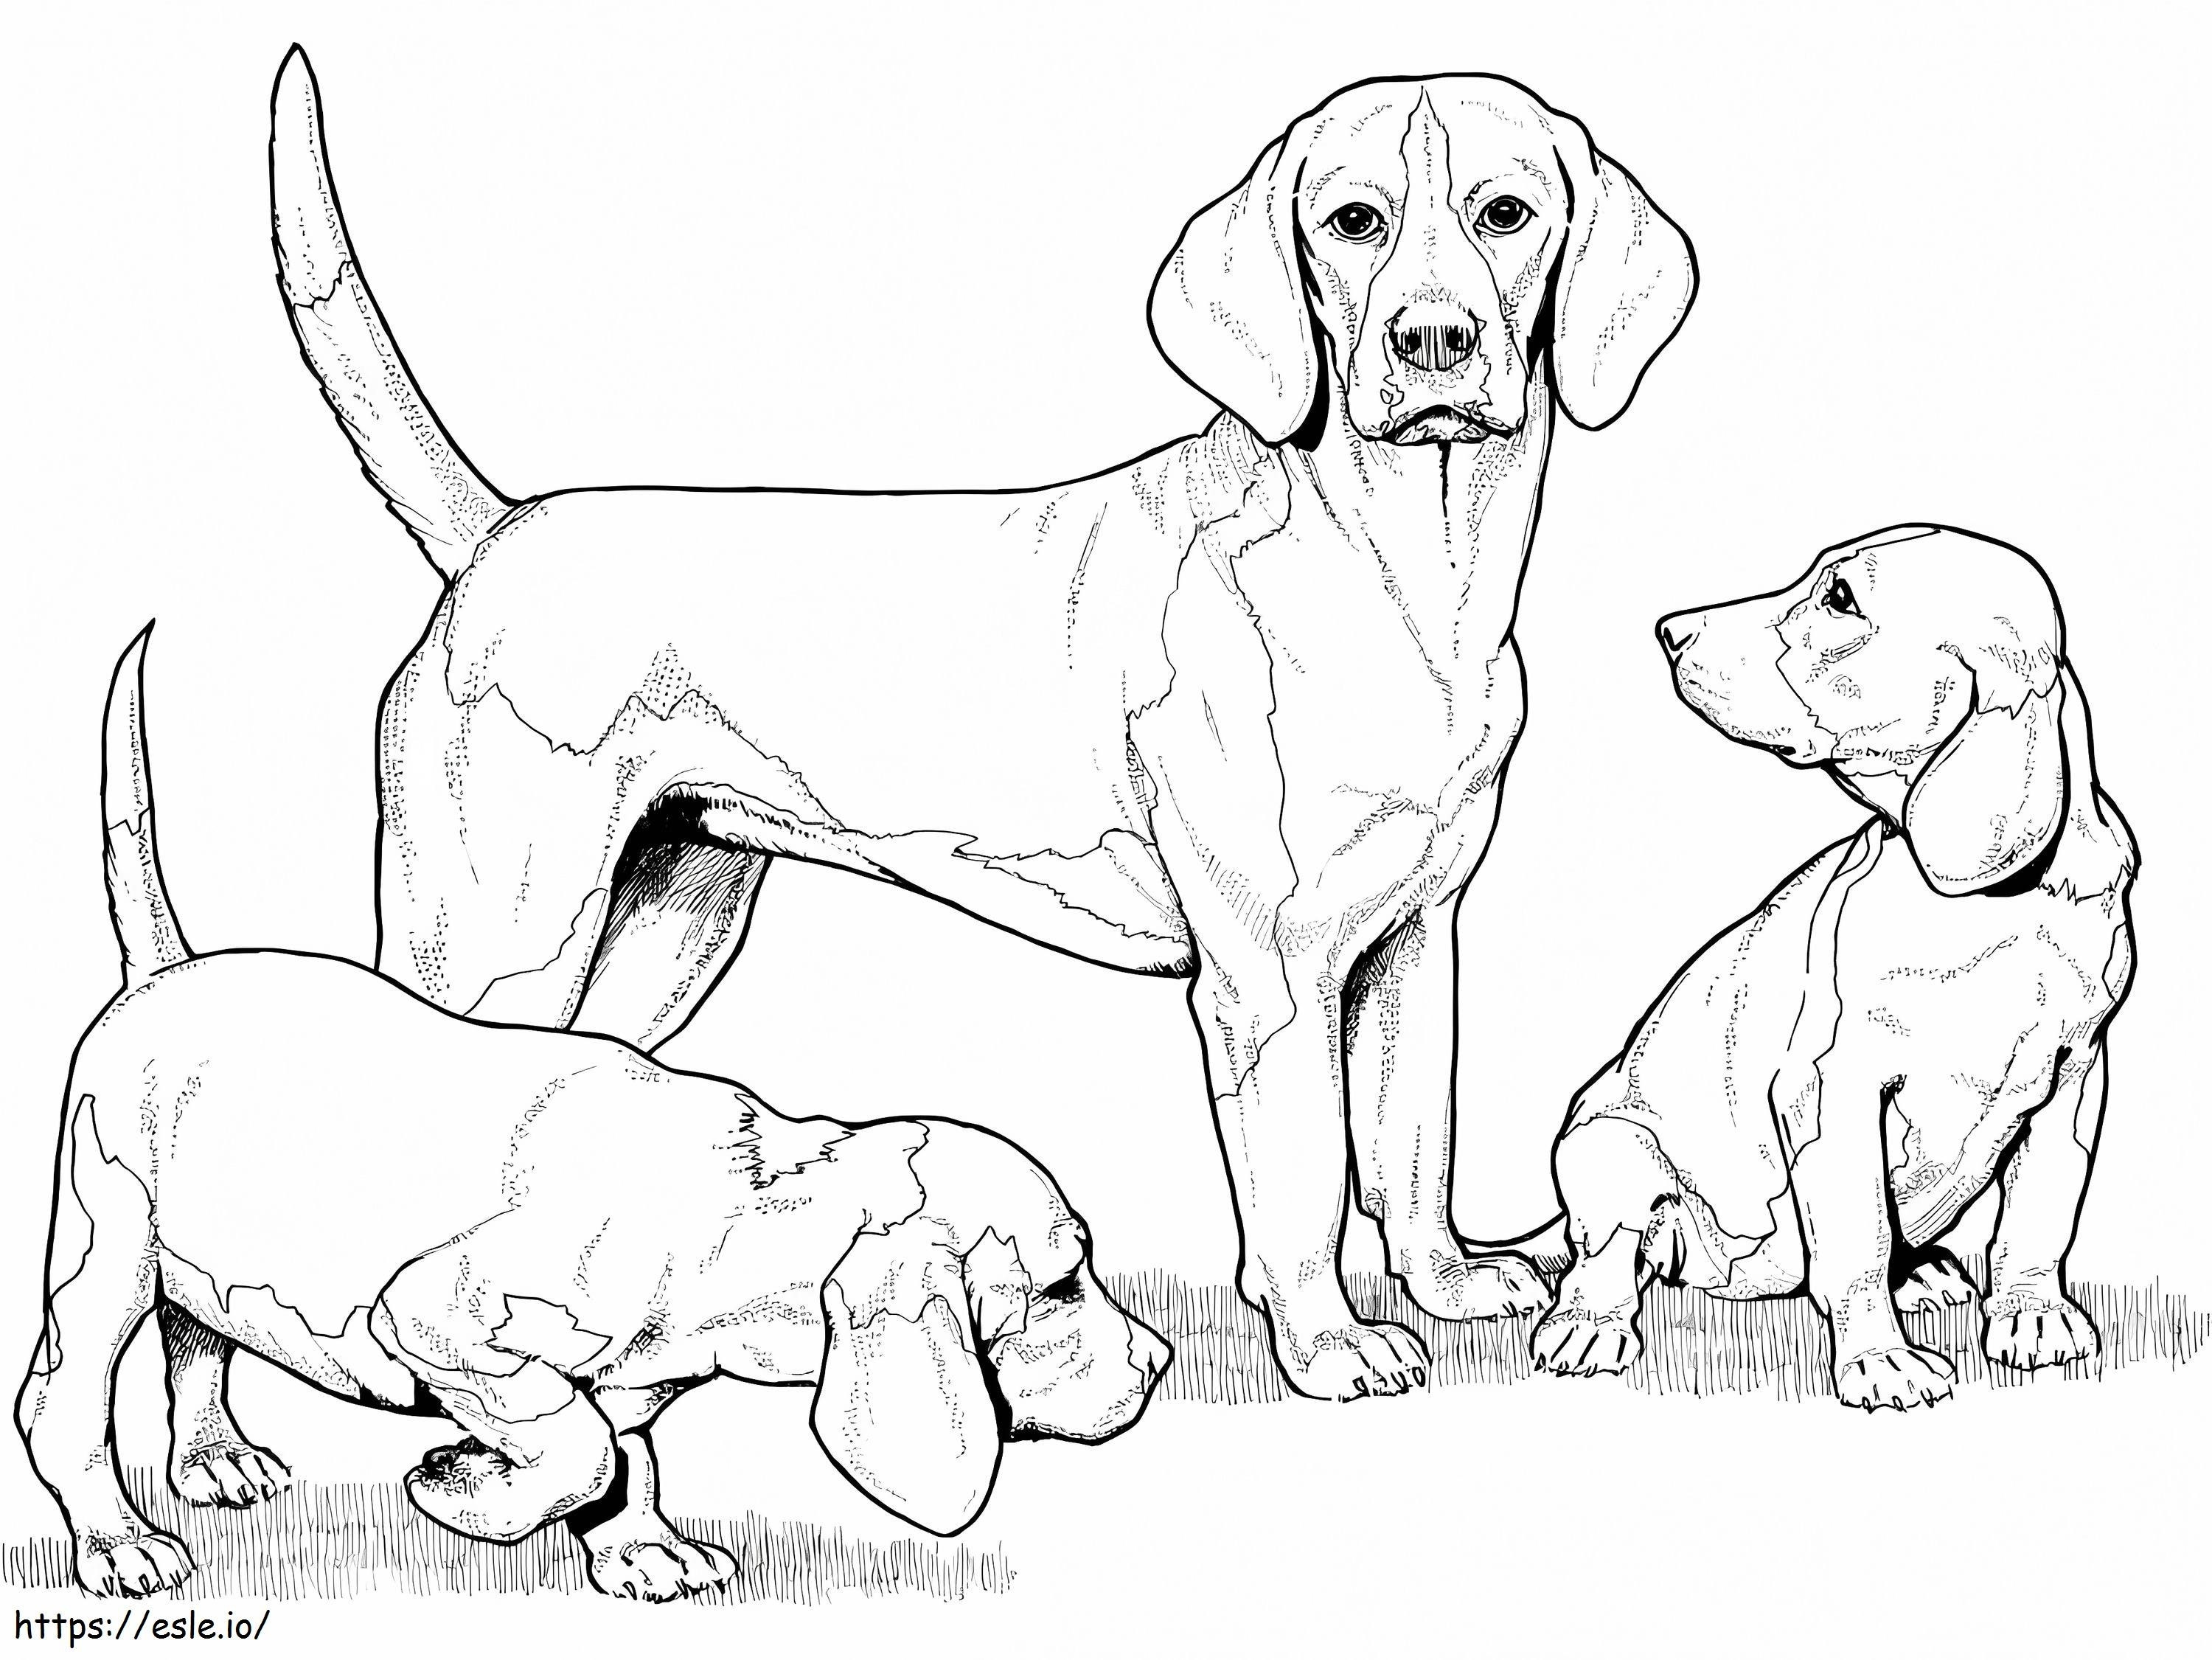 Beagle With Puppies coloring page